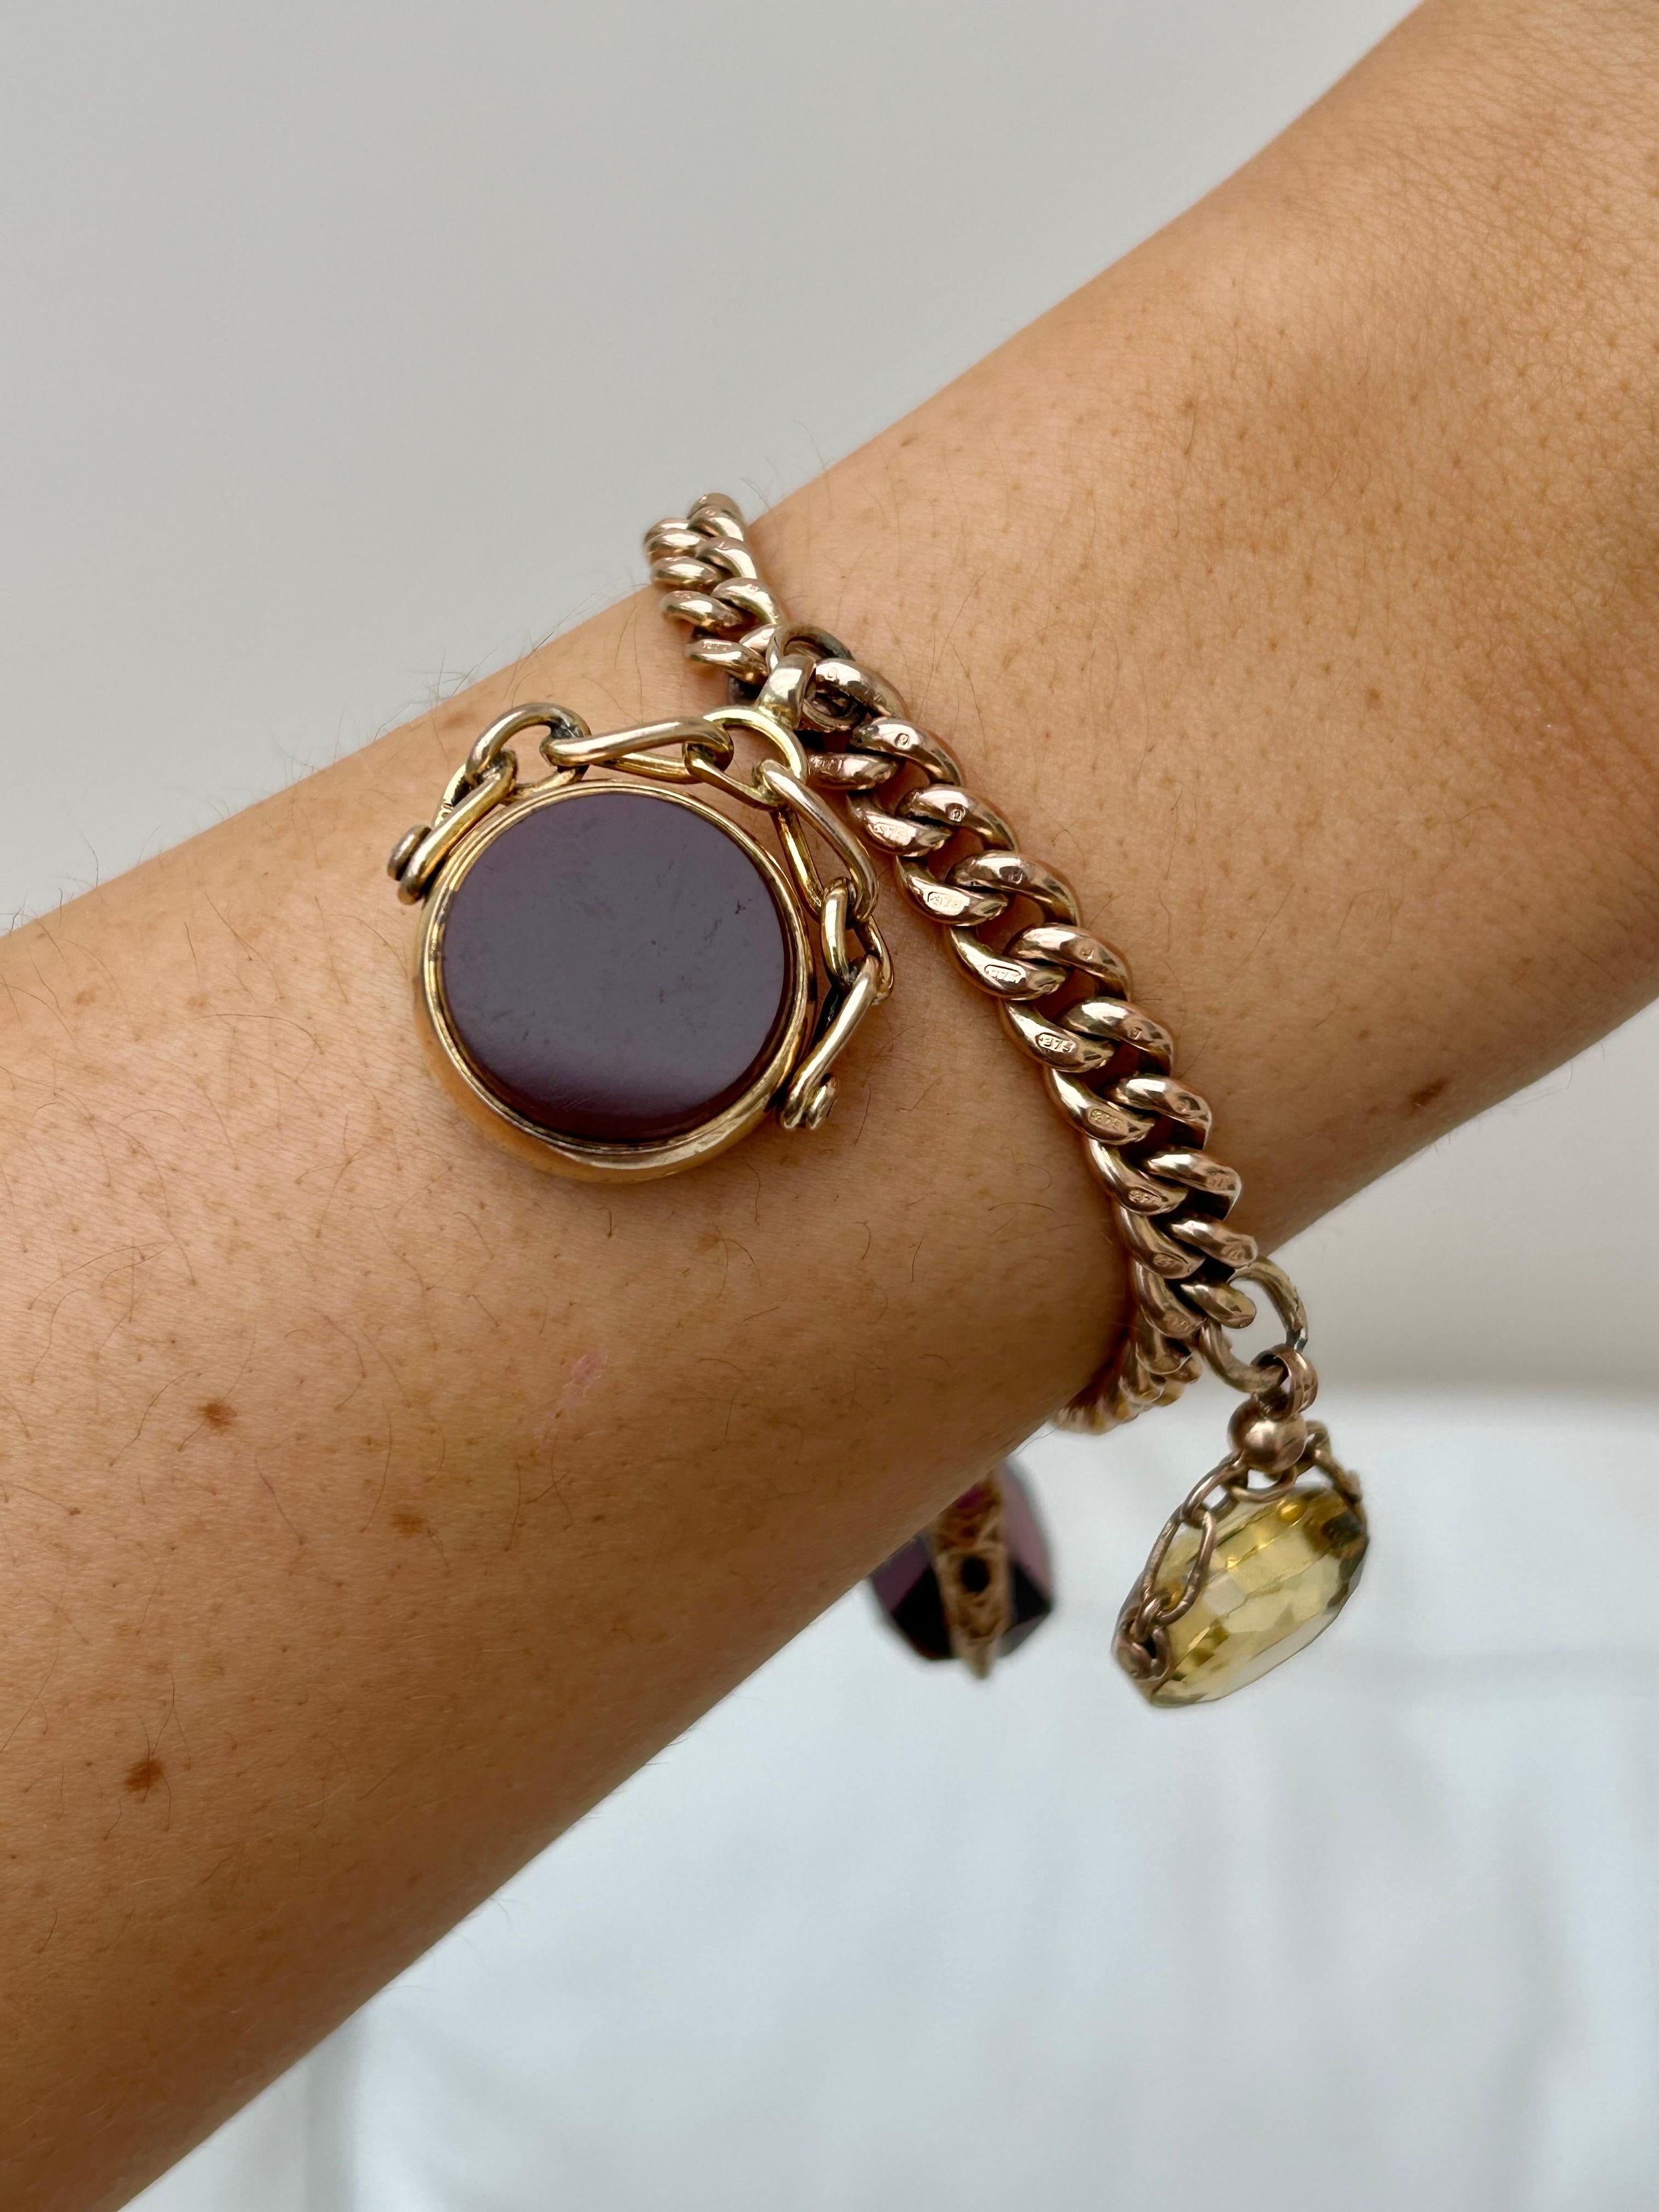 Chunky Antique 9ct Yellow Gold Curb Bracelet with 3 Fob Seal Pendant 

bloodstone, carnelian, citrine and amethyst 
incredible chunky 3 fob seal bracelet, truly excellent! 

The item comes without the box in the photos but will be presented in a